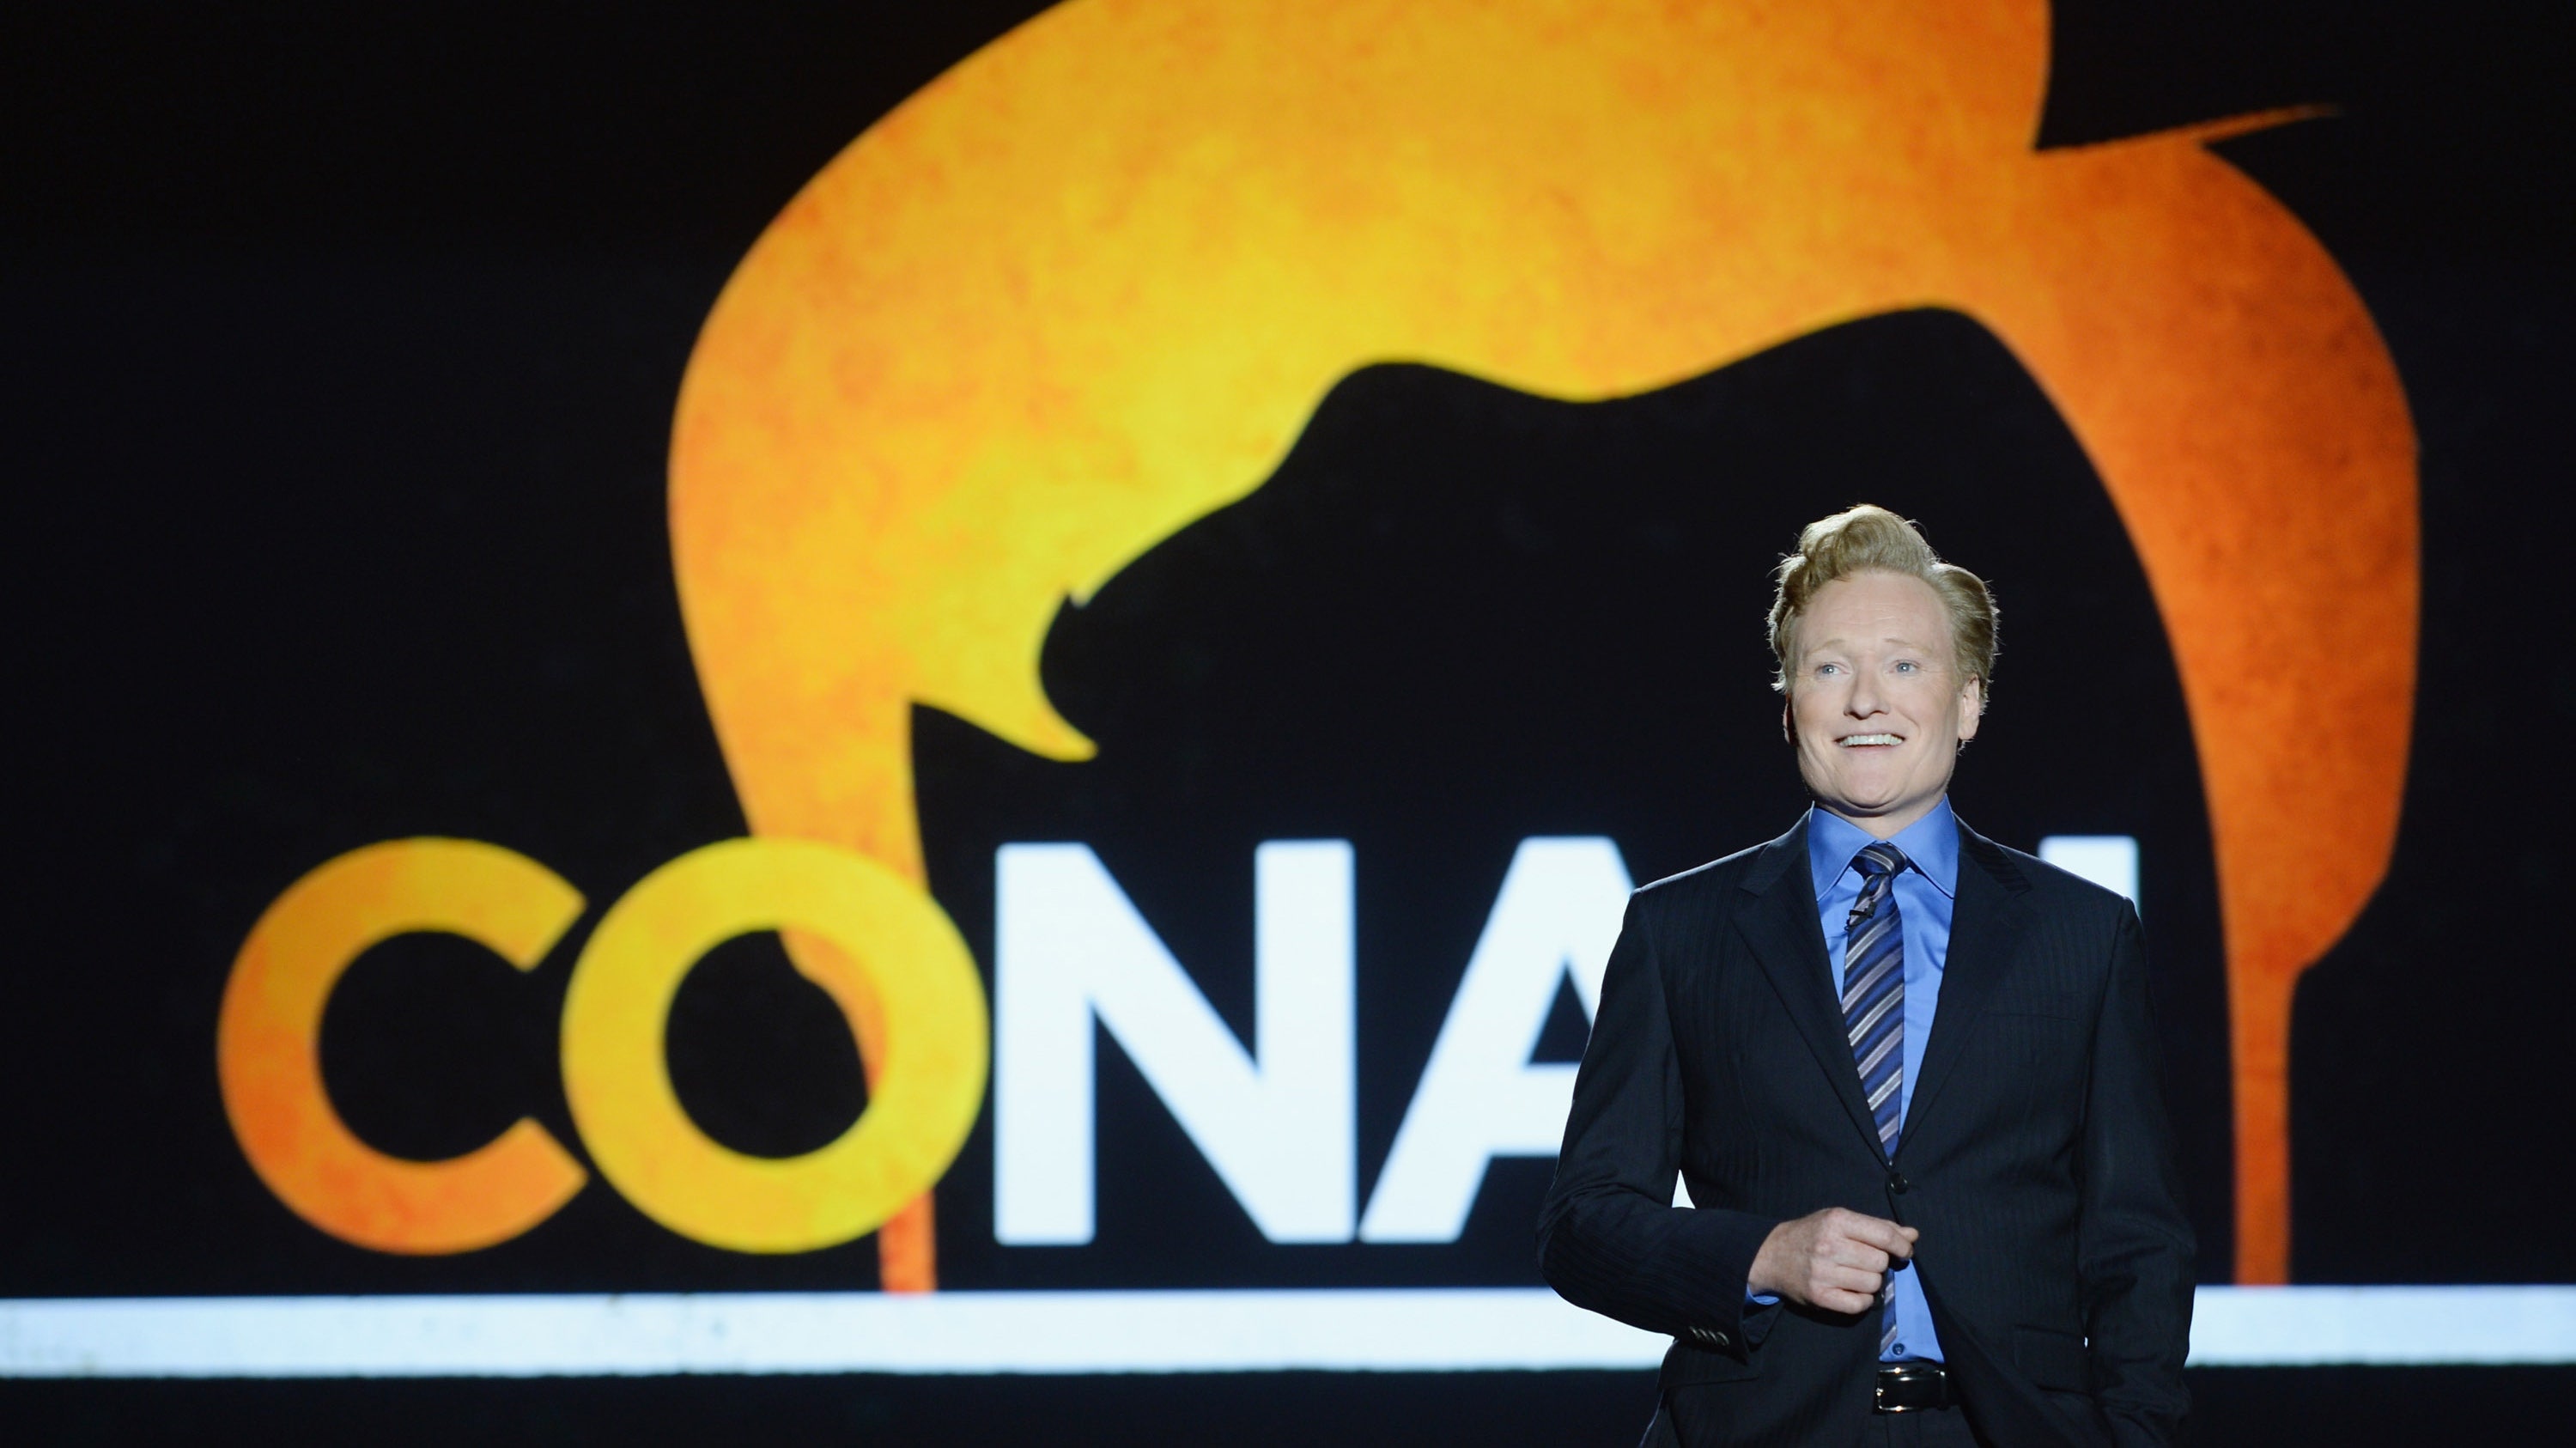 Conan O'Brien journeys to Cuba in search of late night surprise